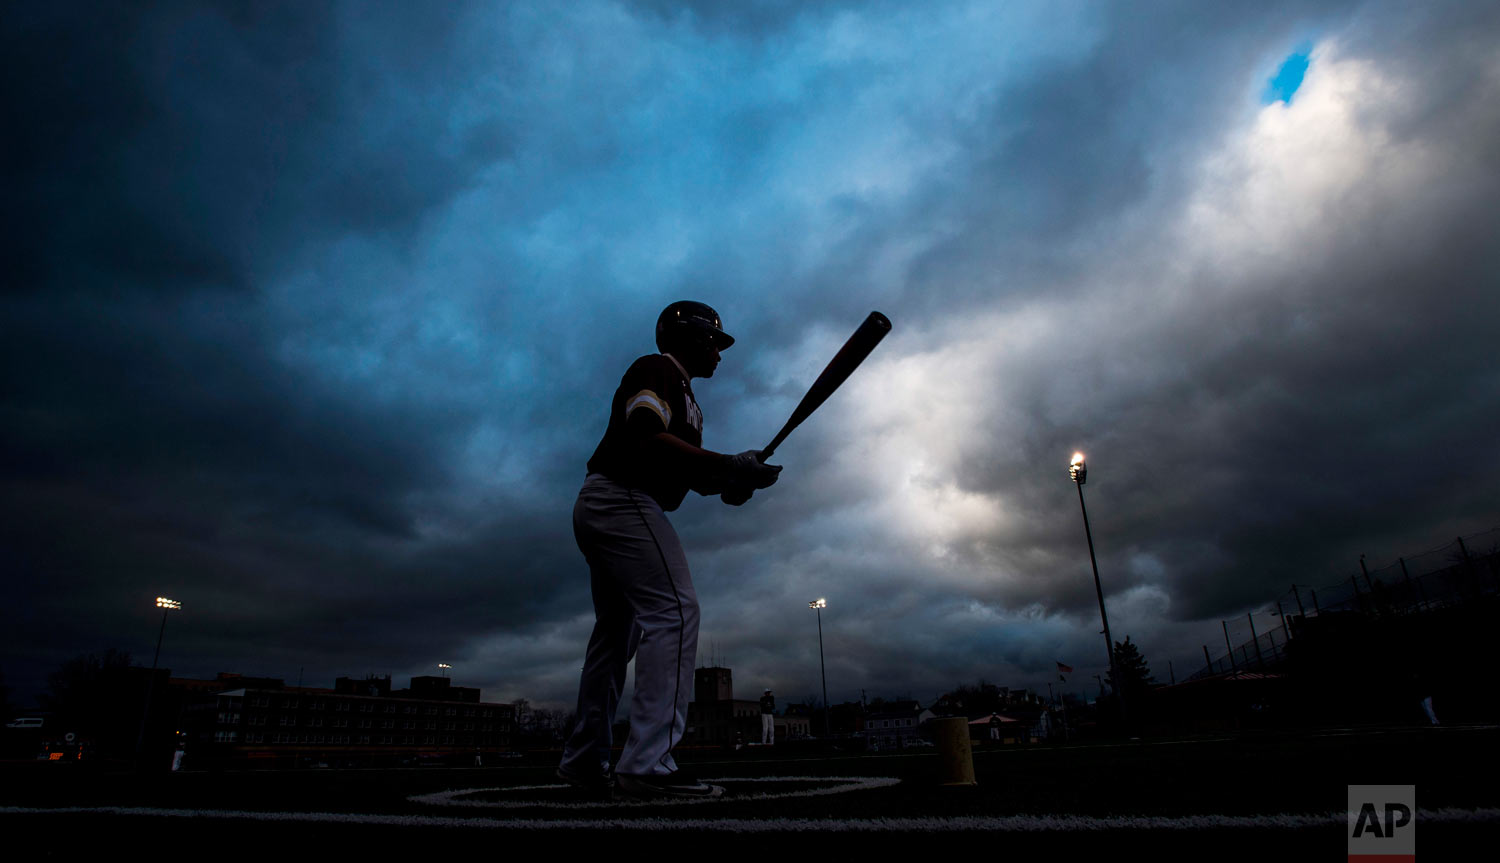  Steel Valley's Terevon Harris stands on deck on Wednesday, April 25, 2018, during the game against Valley at West Field in Munhall, a suburb of Pittsburgh. (Steph Chambers/Pittsburgh Post-Gazette via AP) 